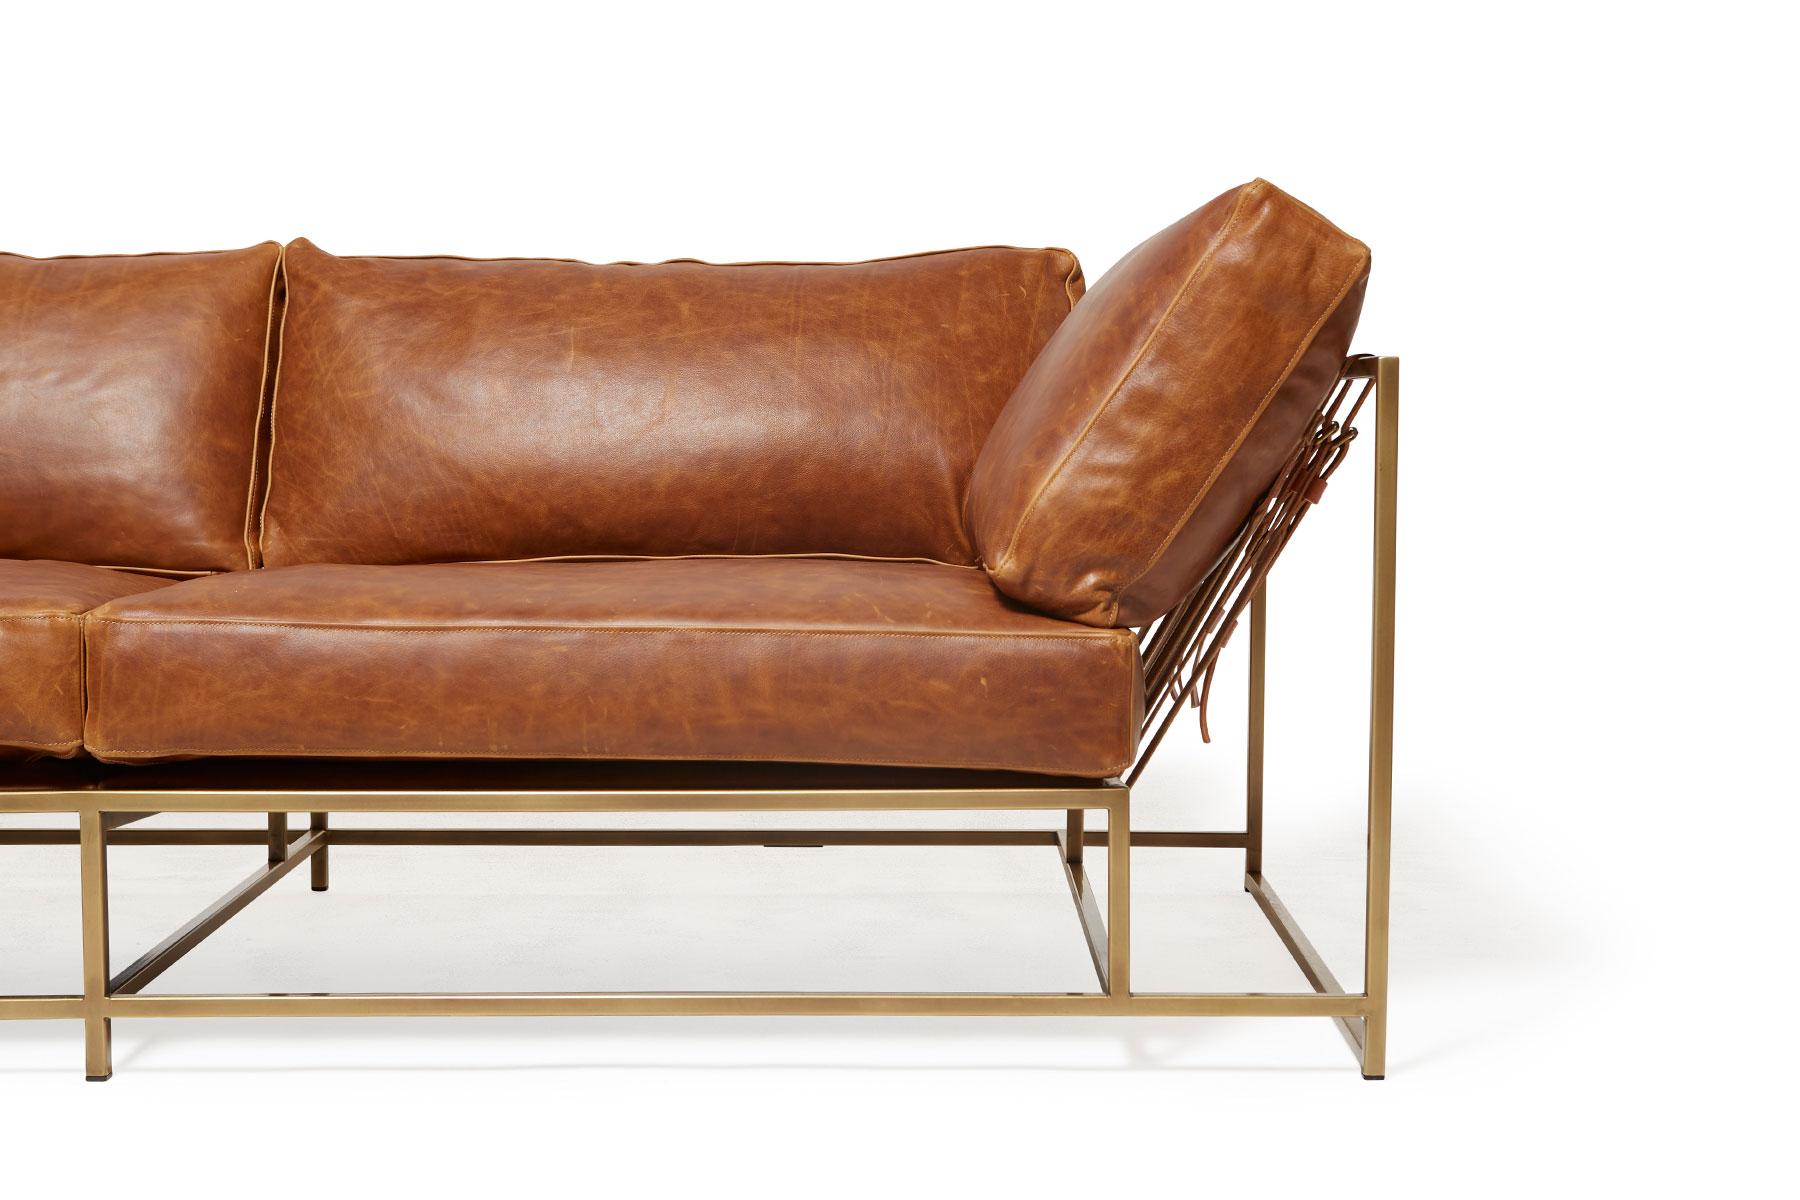 Metalwork Waxed Potomac Tan Leather and Antique Brass Two-Seat Sofa For Sale